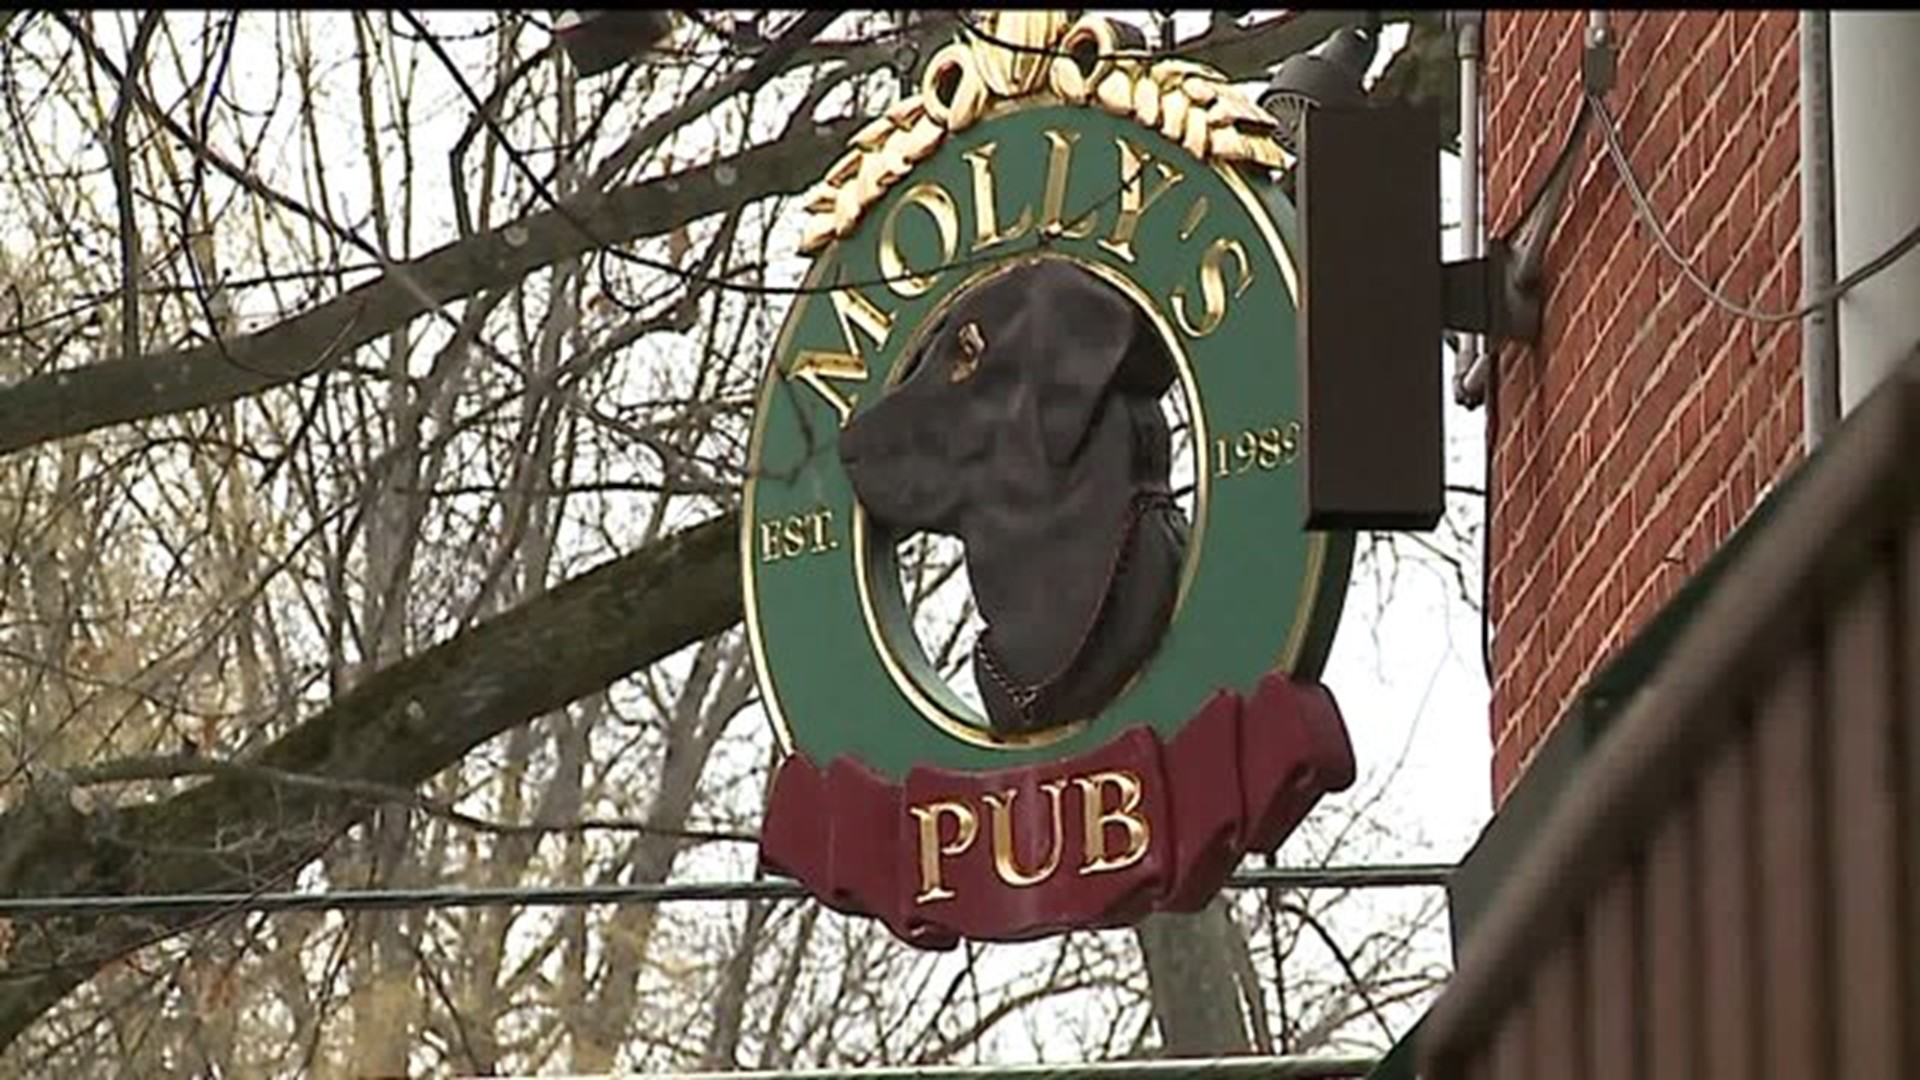 Pub owner charges